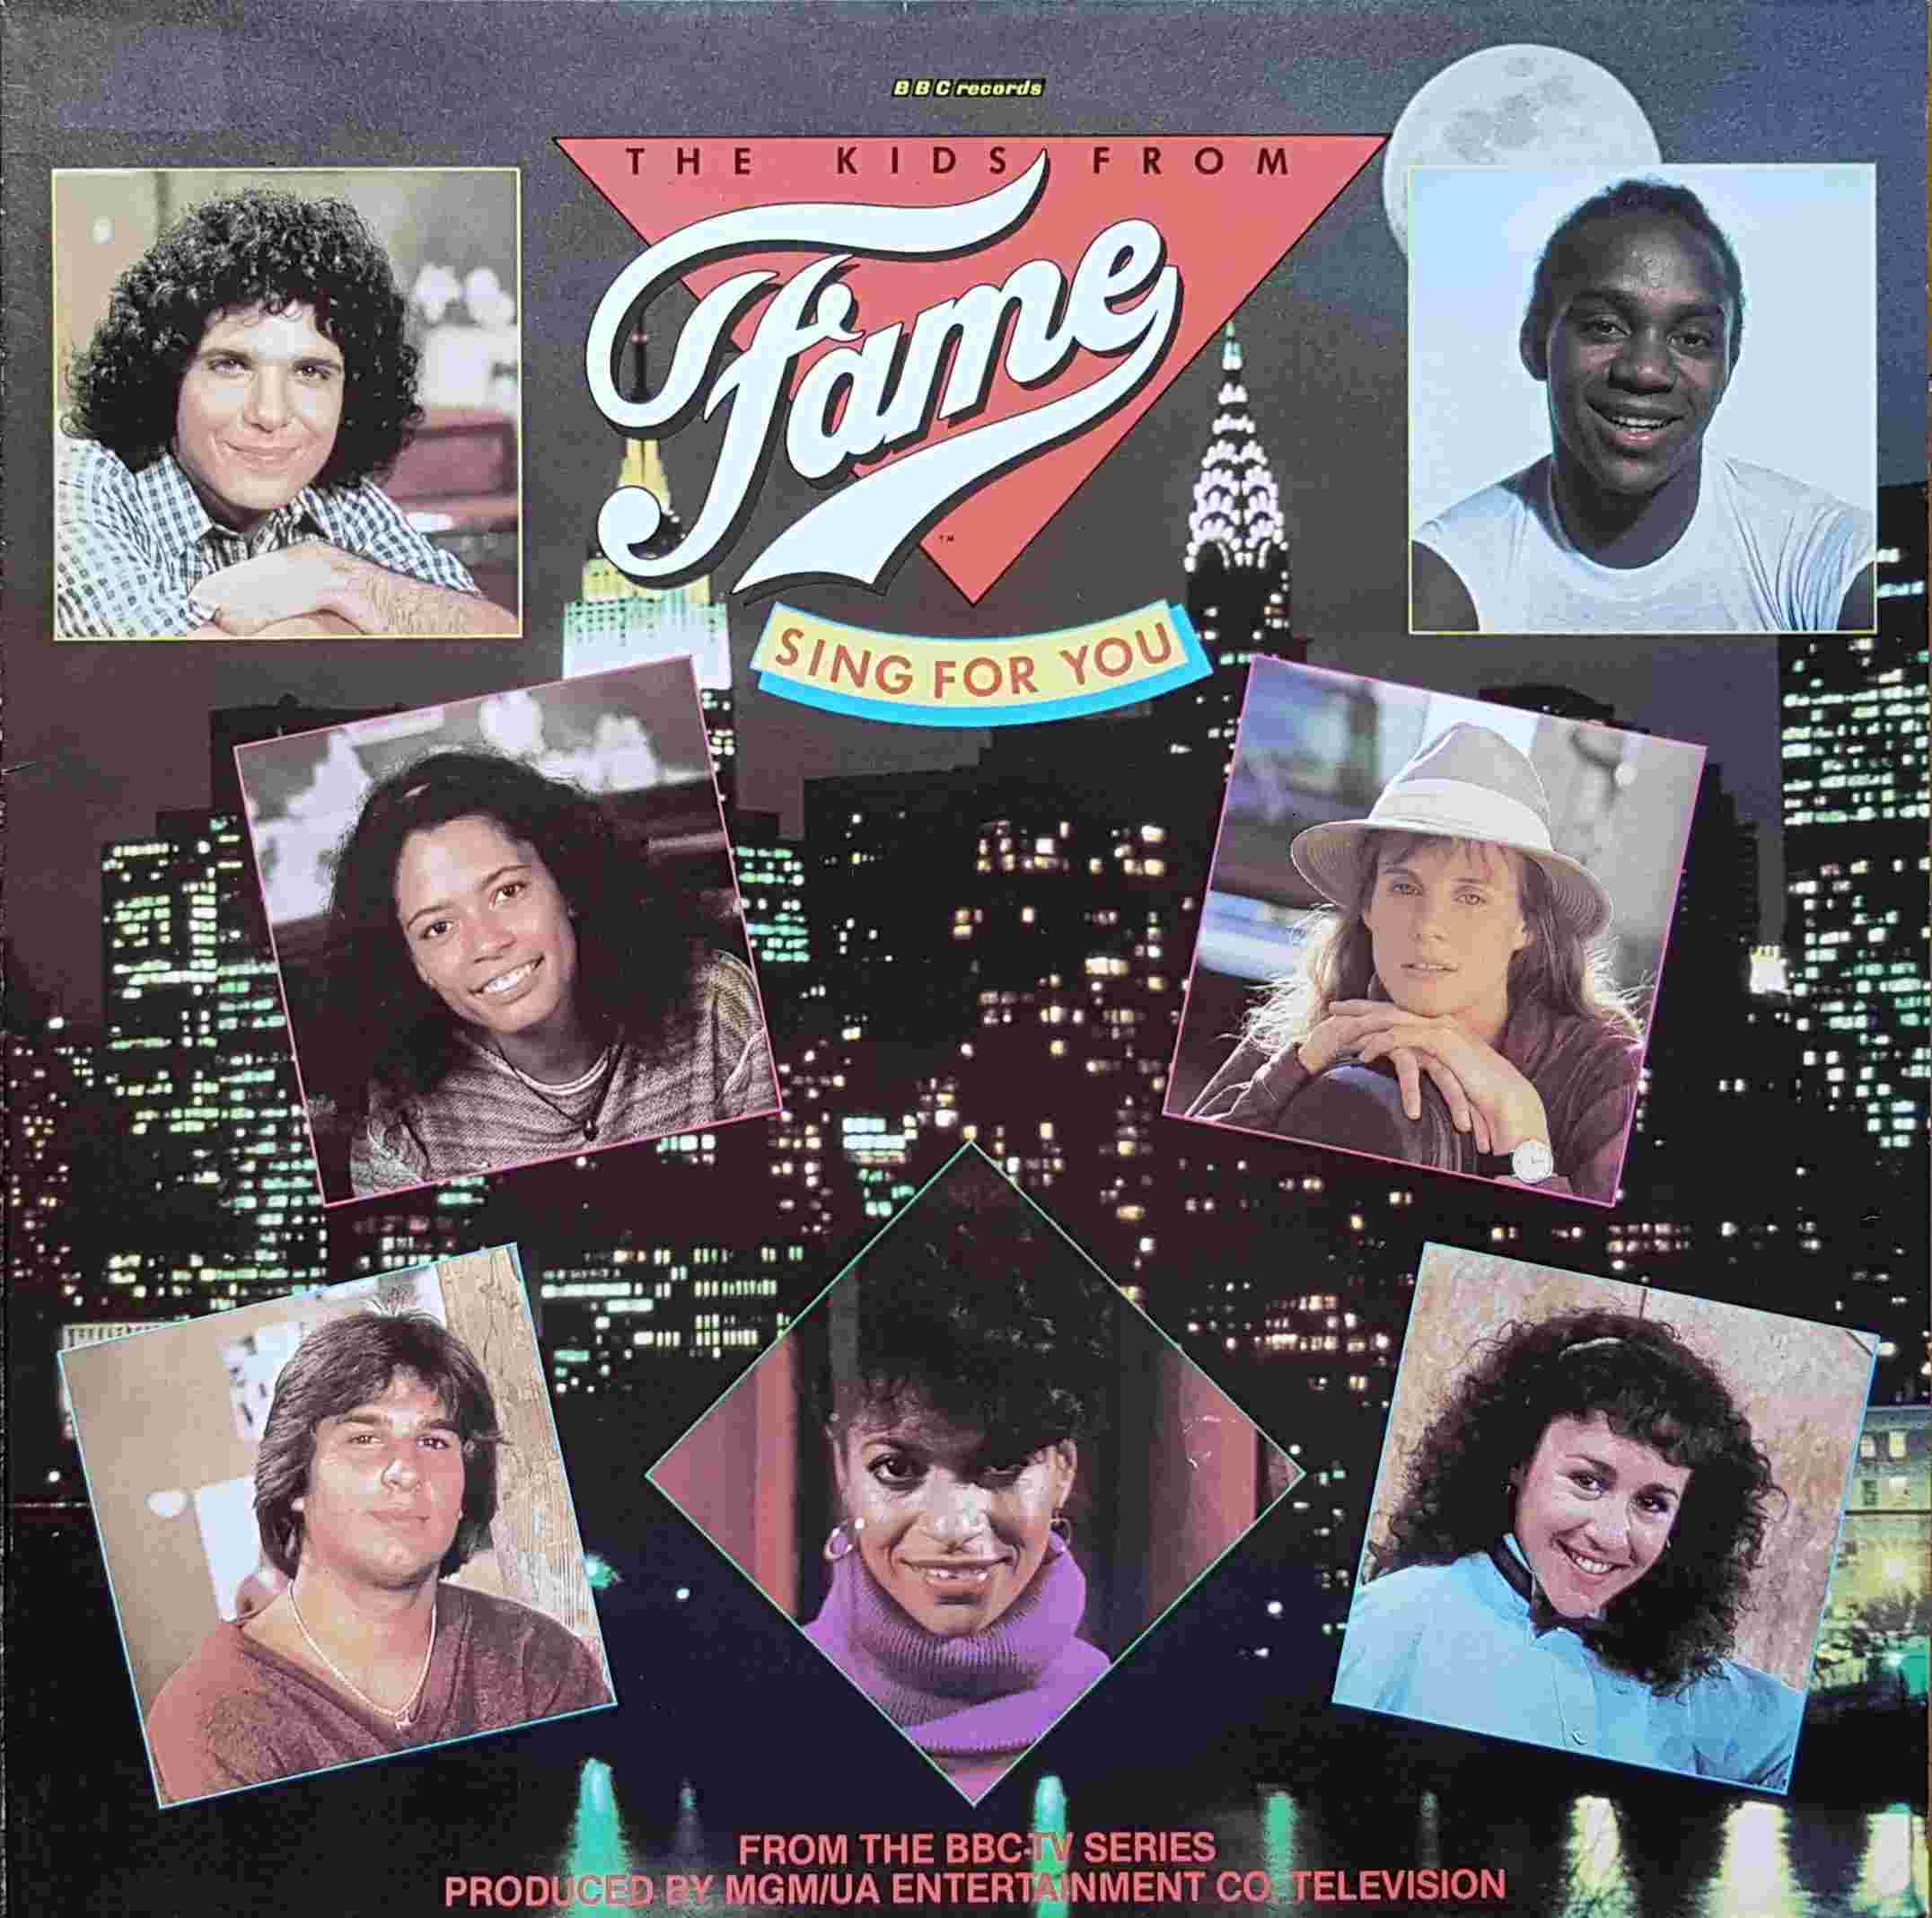 Picture of The kids from fame - Volume 5 by artist Various from the BBC albums - Records and Tapes library